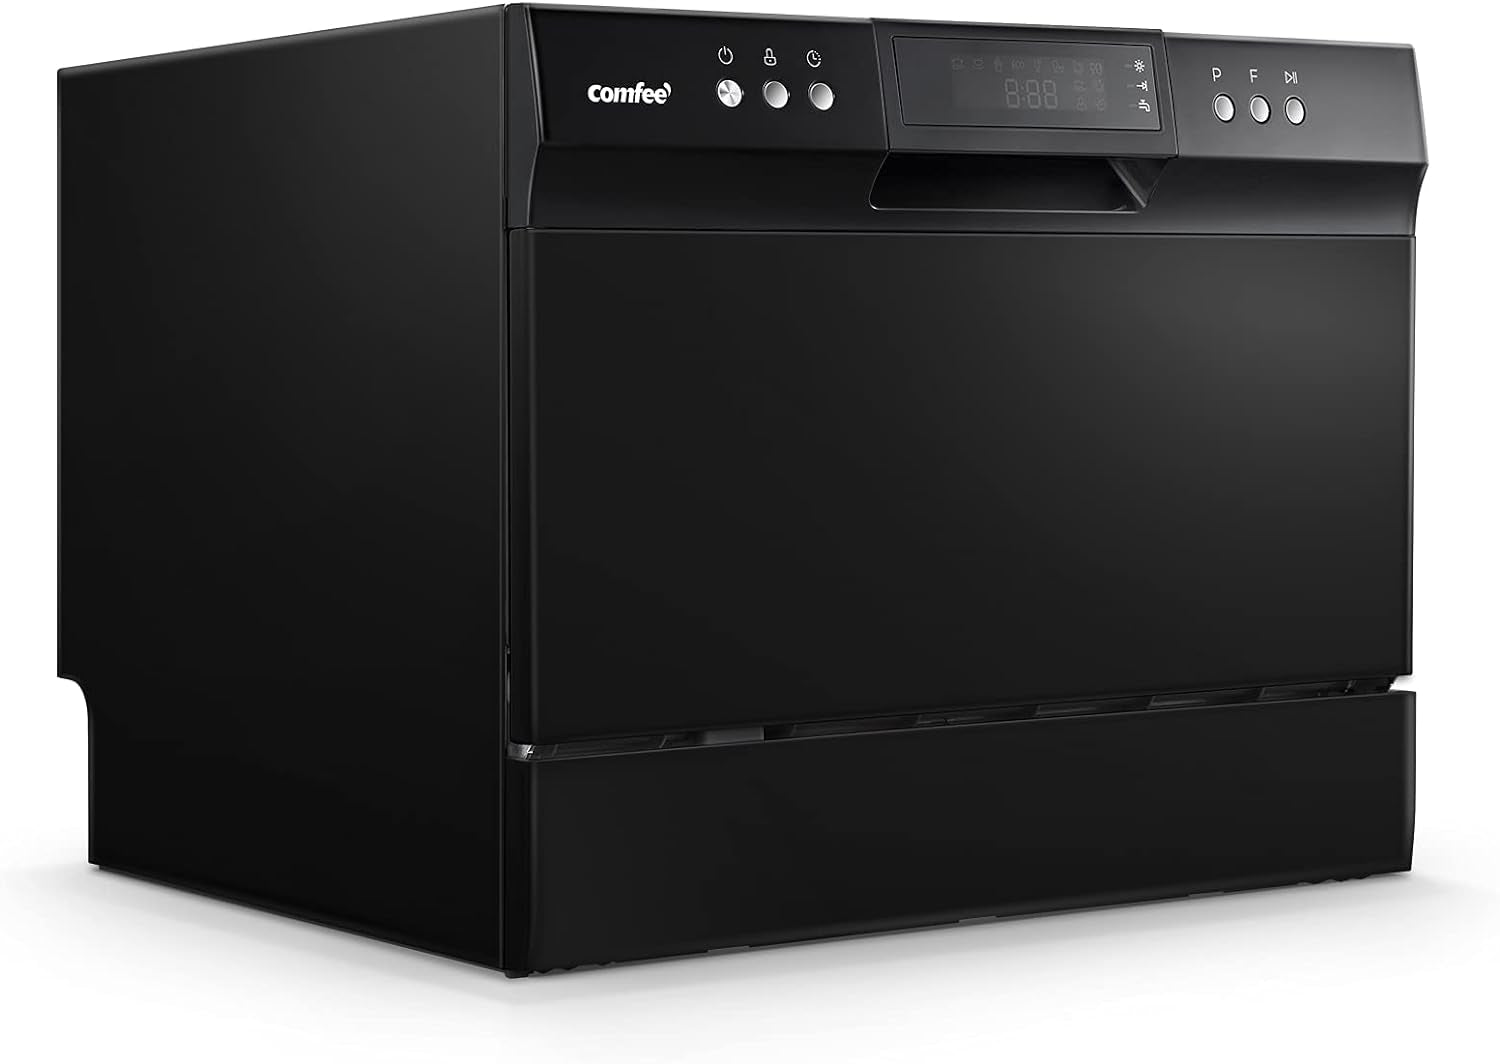 COMFEE’ Countertop Dishwasher, Energy Star Portable Dishwasher, 6 Place Settings & 8 Washing Programs, Speed, Baby-Care, ECO& Glass, Dish Washer for Dorm, RV& Apartment, Black